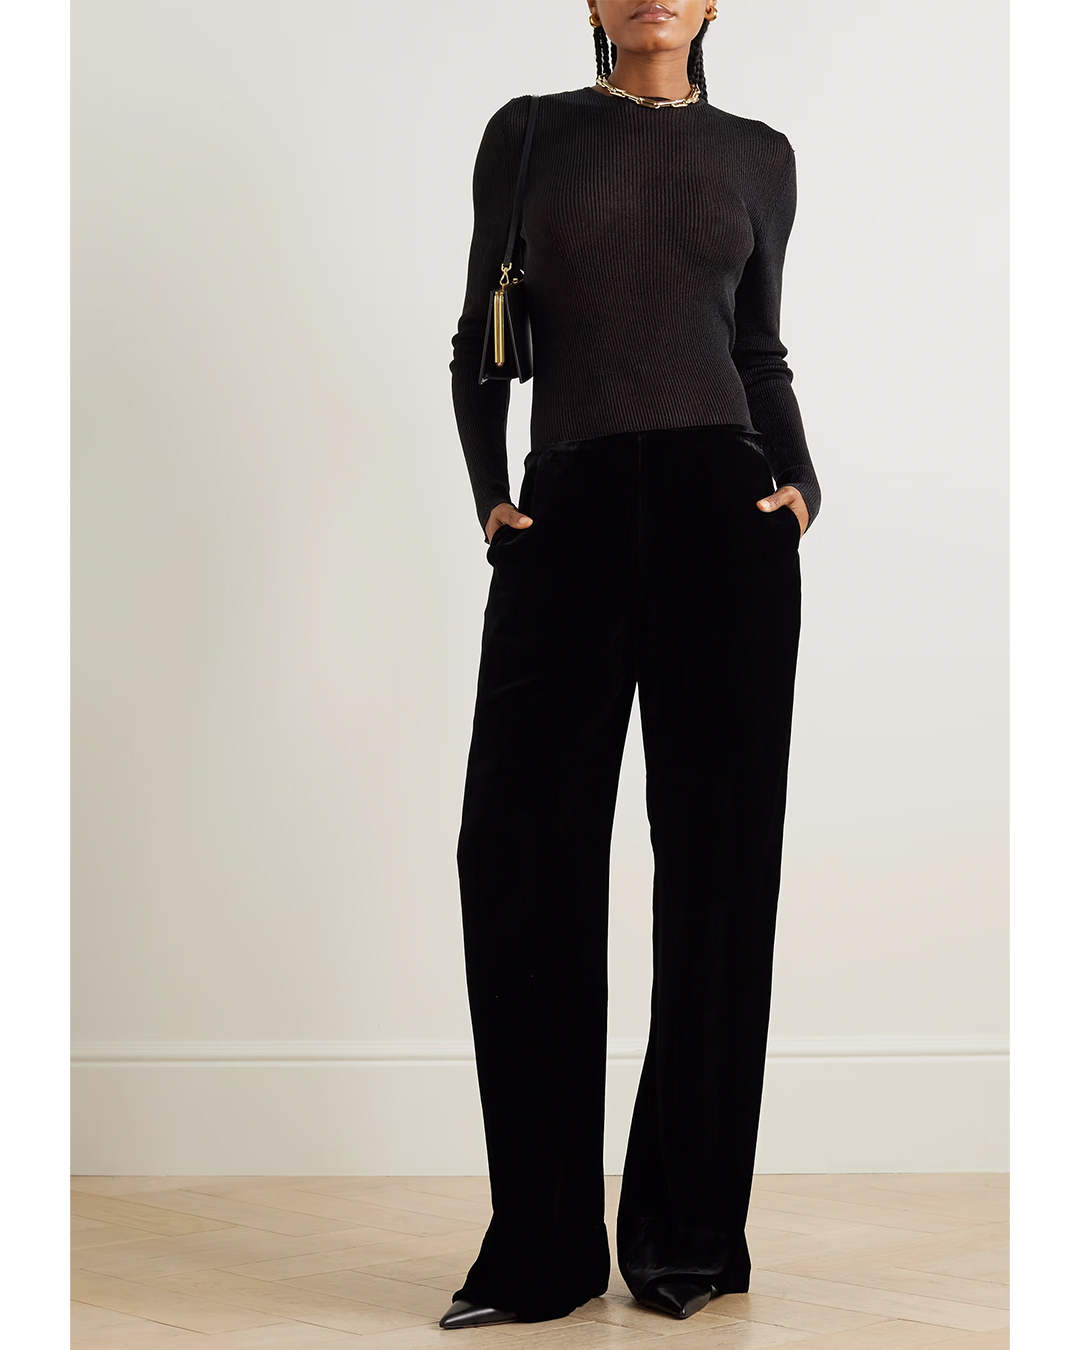 How to Wear Velvet Pants for Comfort and Style - YOUR TRUE SELF BLOG